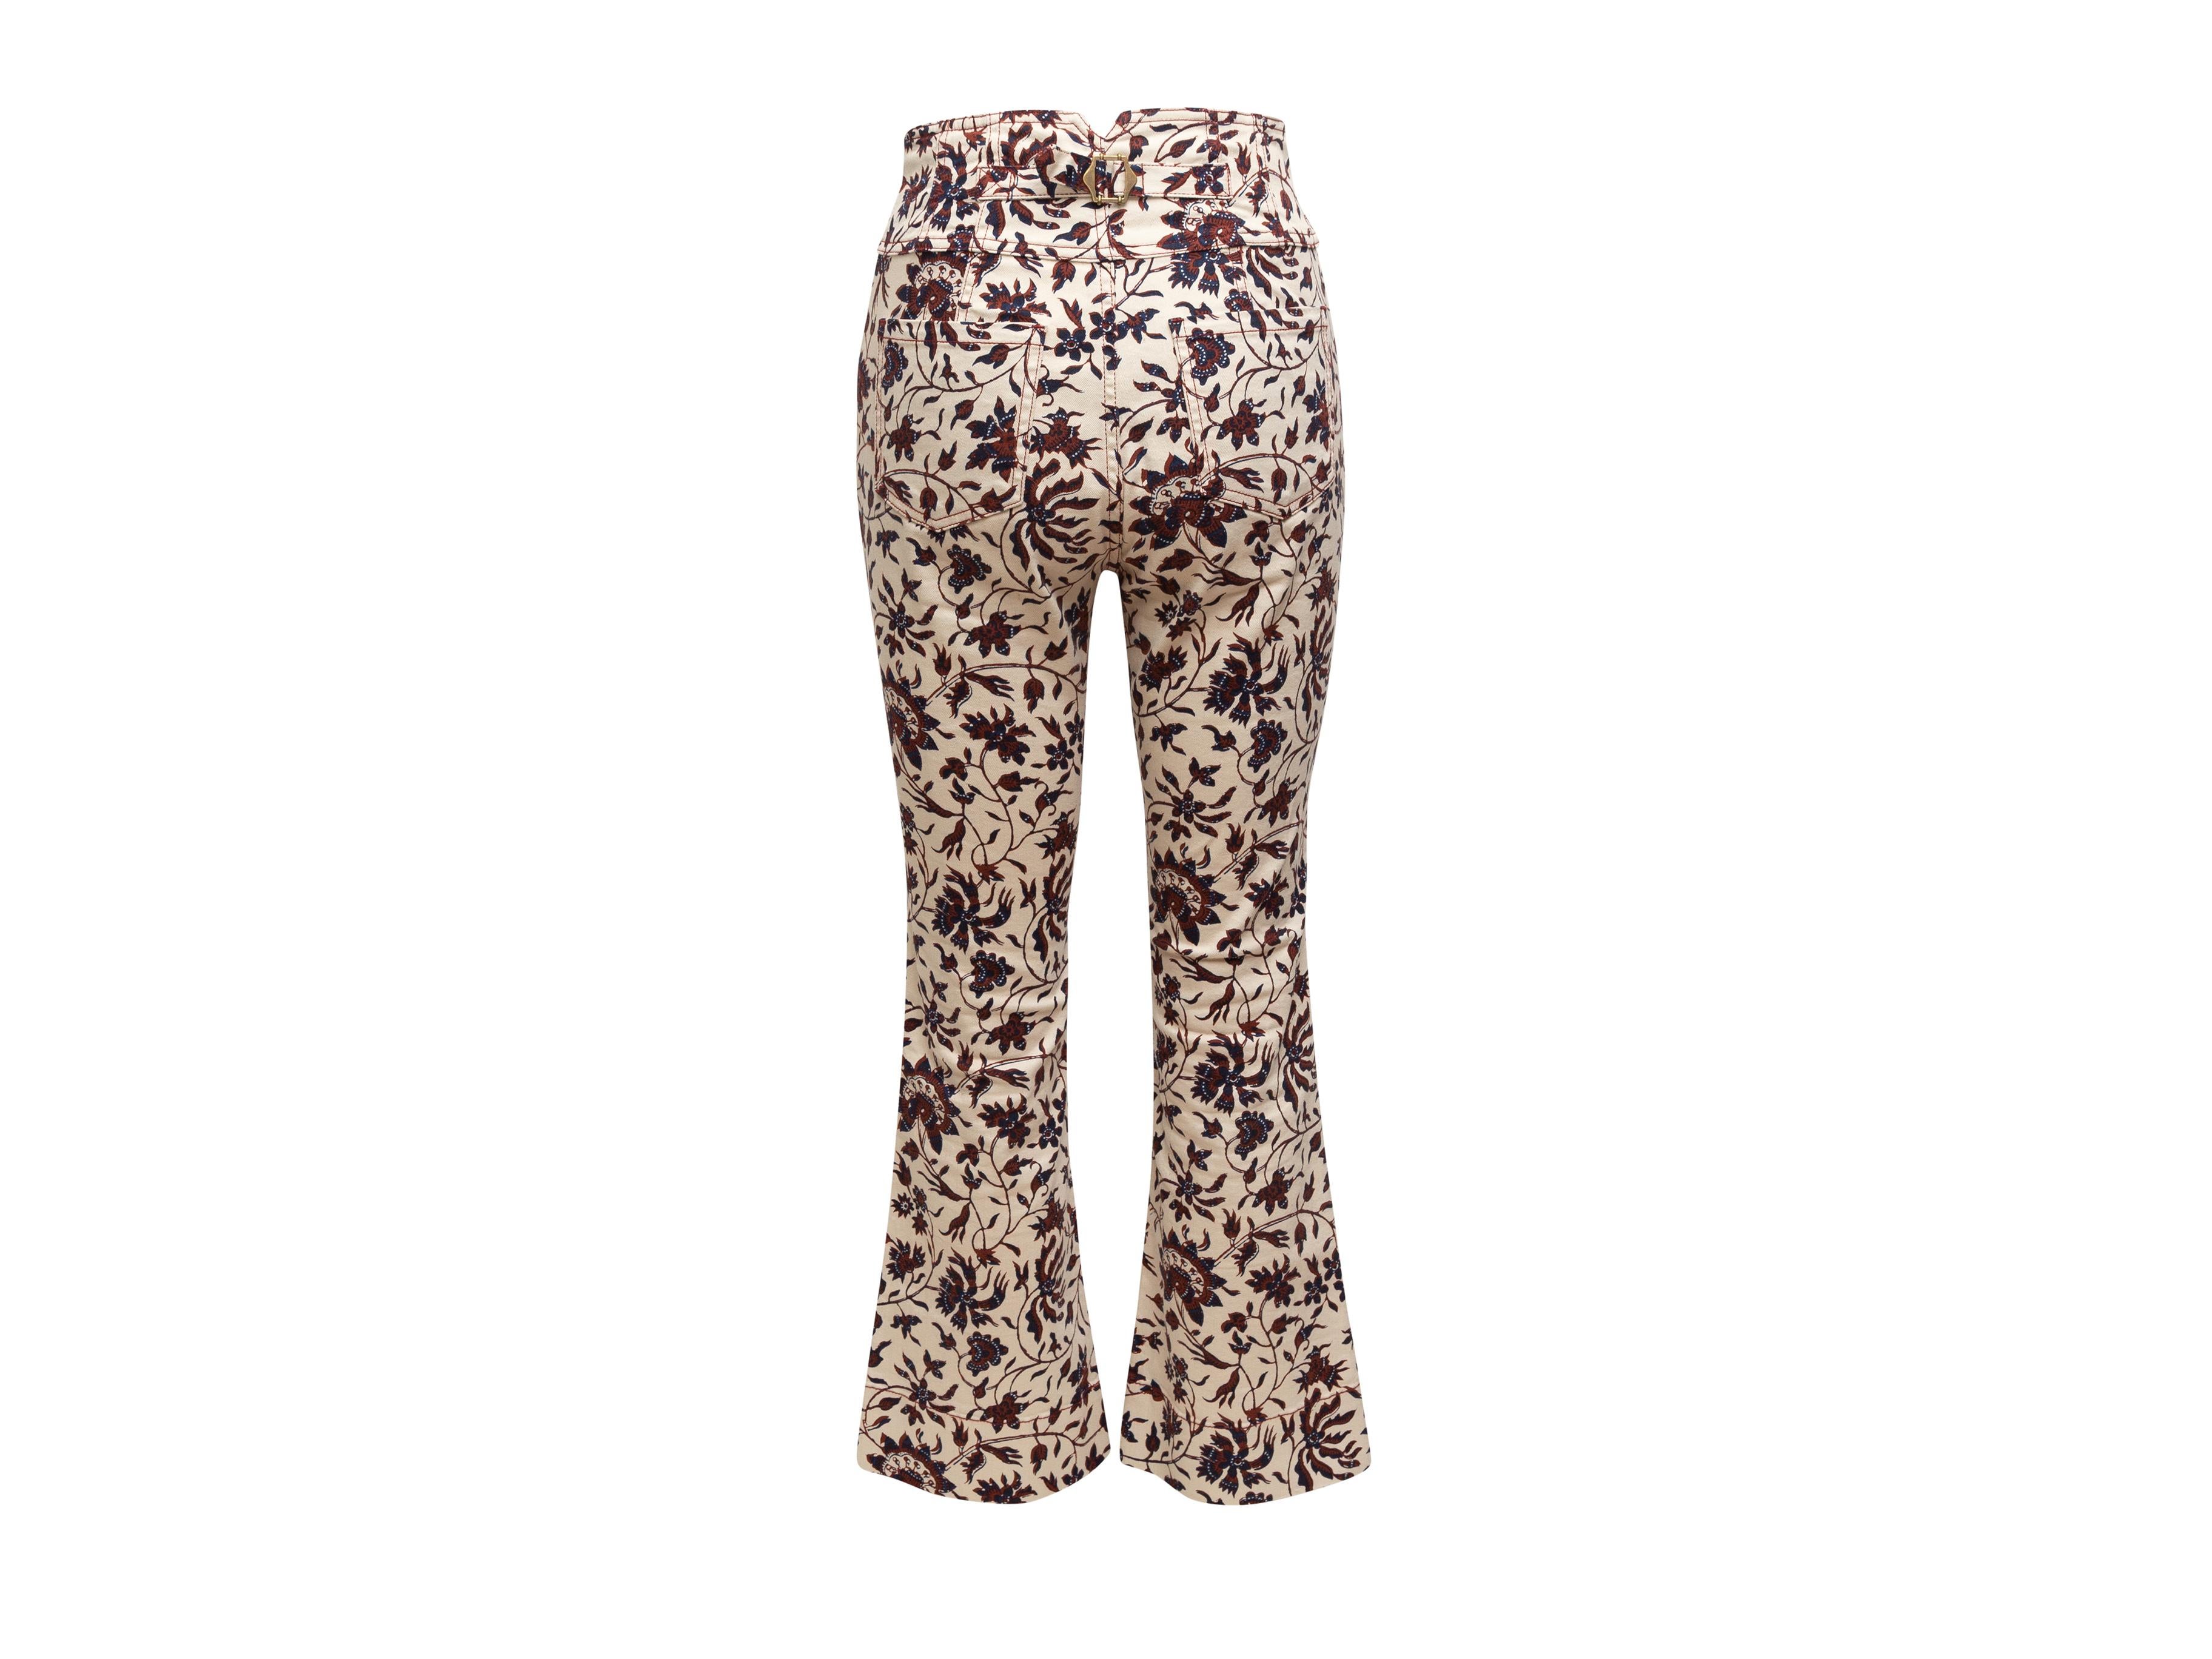 Product details: White, maroon, and navy high-rise flared pants by Ulla Johnson. Botanical print throughout. Four pockets. Button closures at front. 27